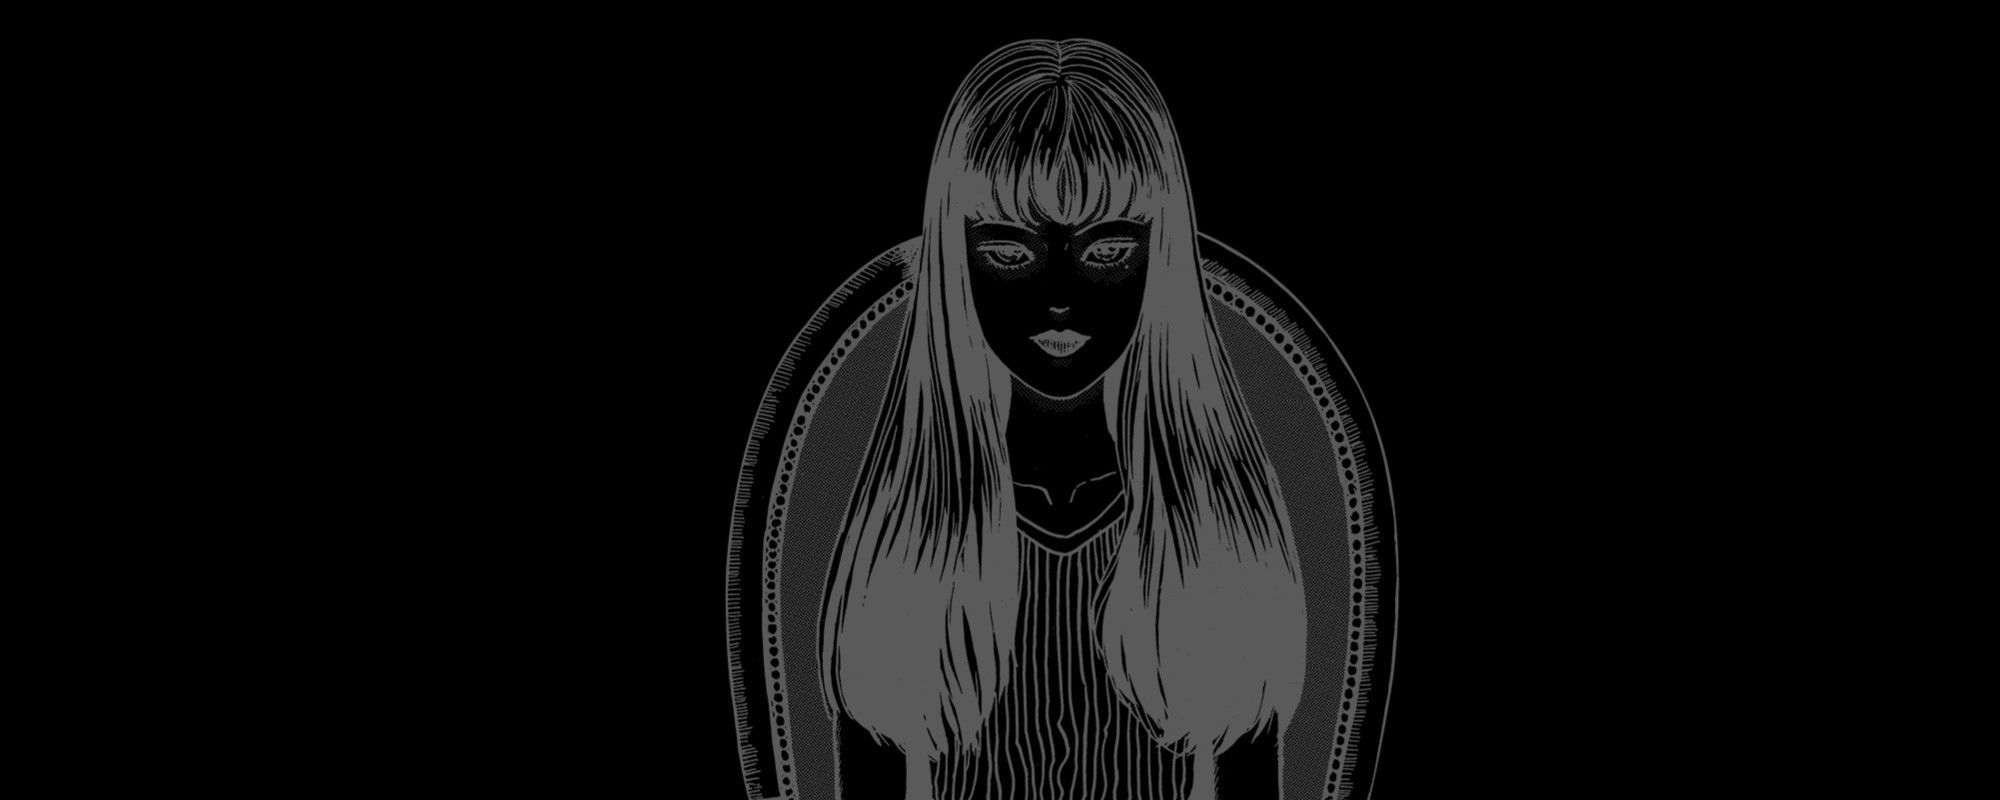 Tomie Computer Wallpapers - Wallpaper Cave